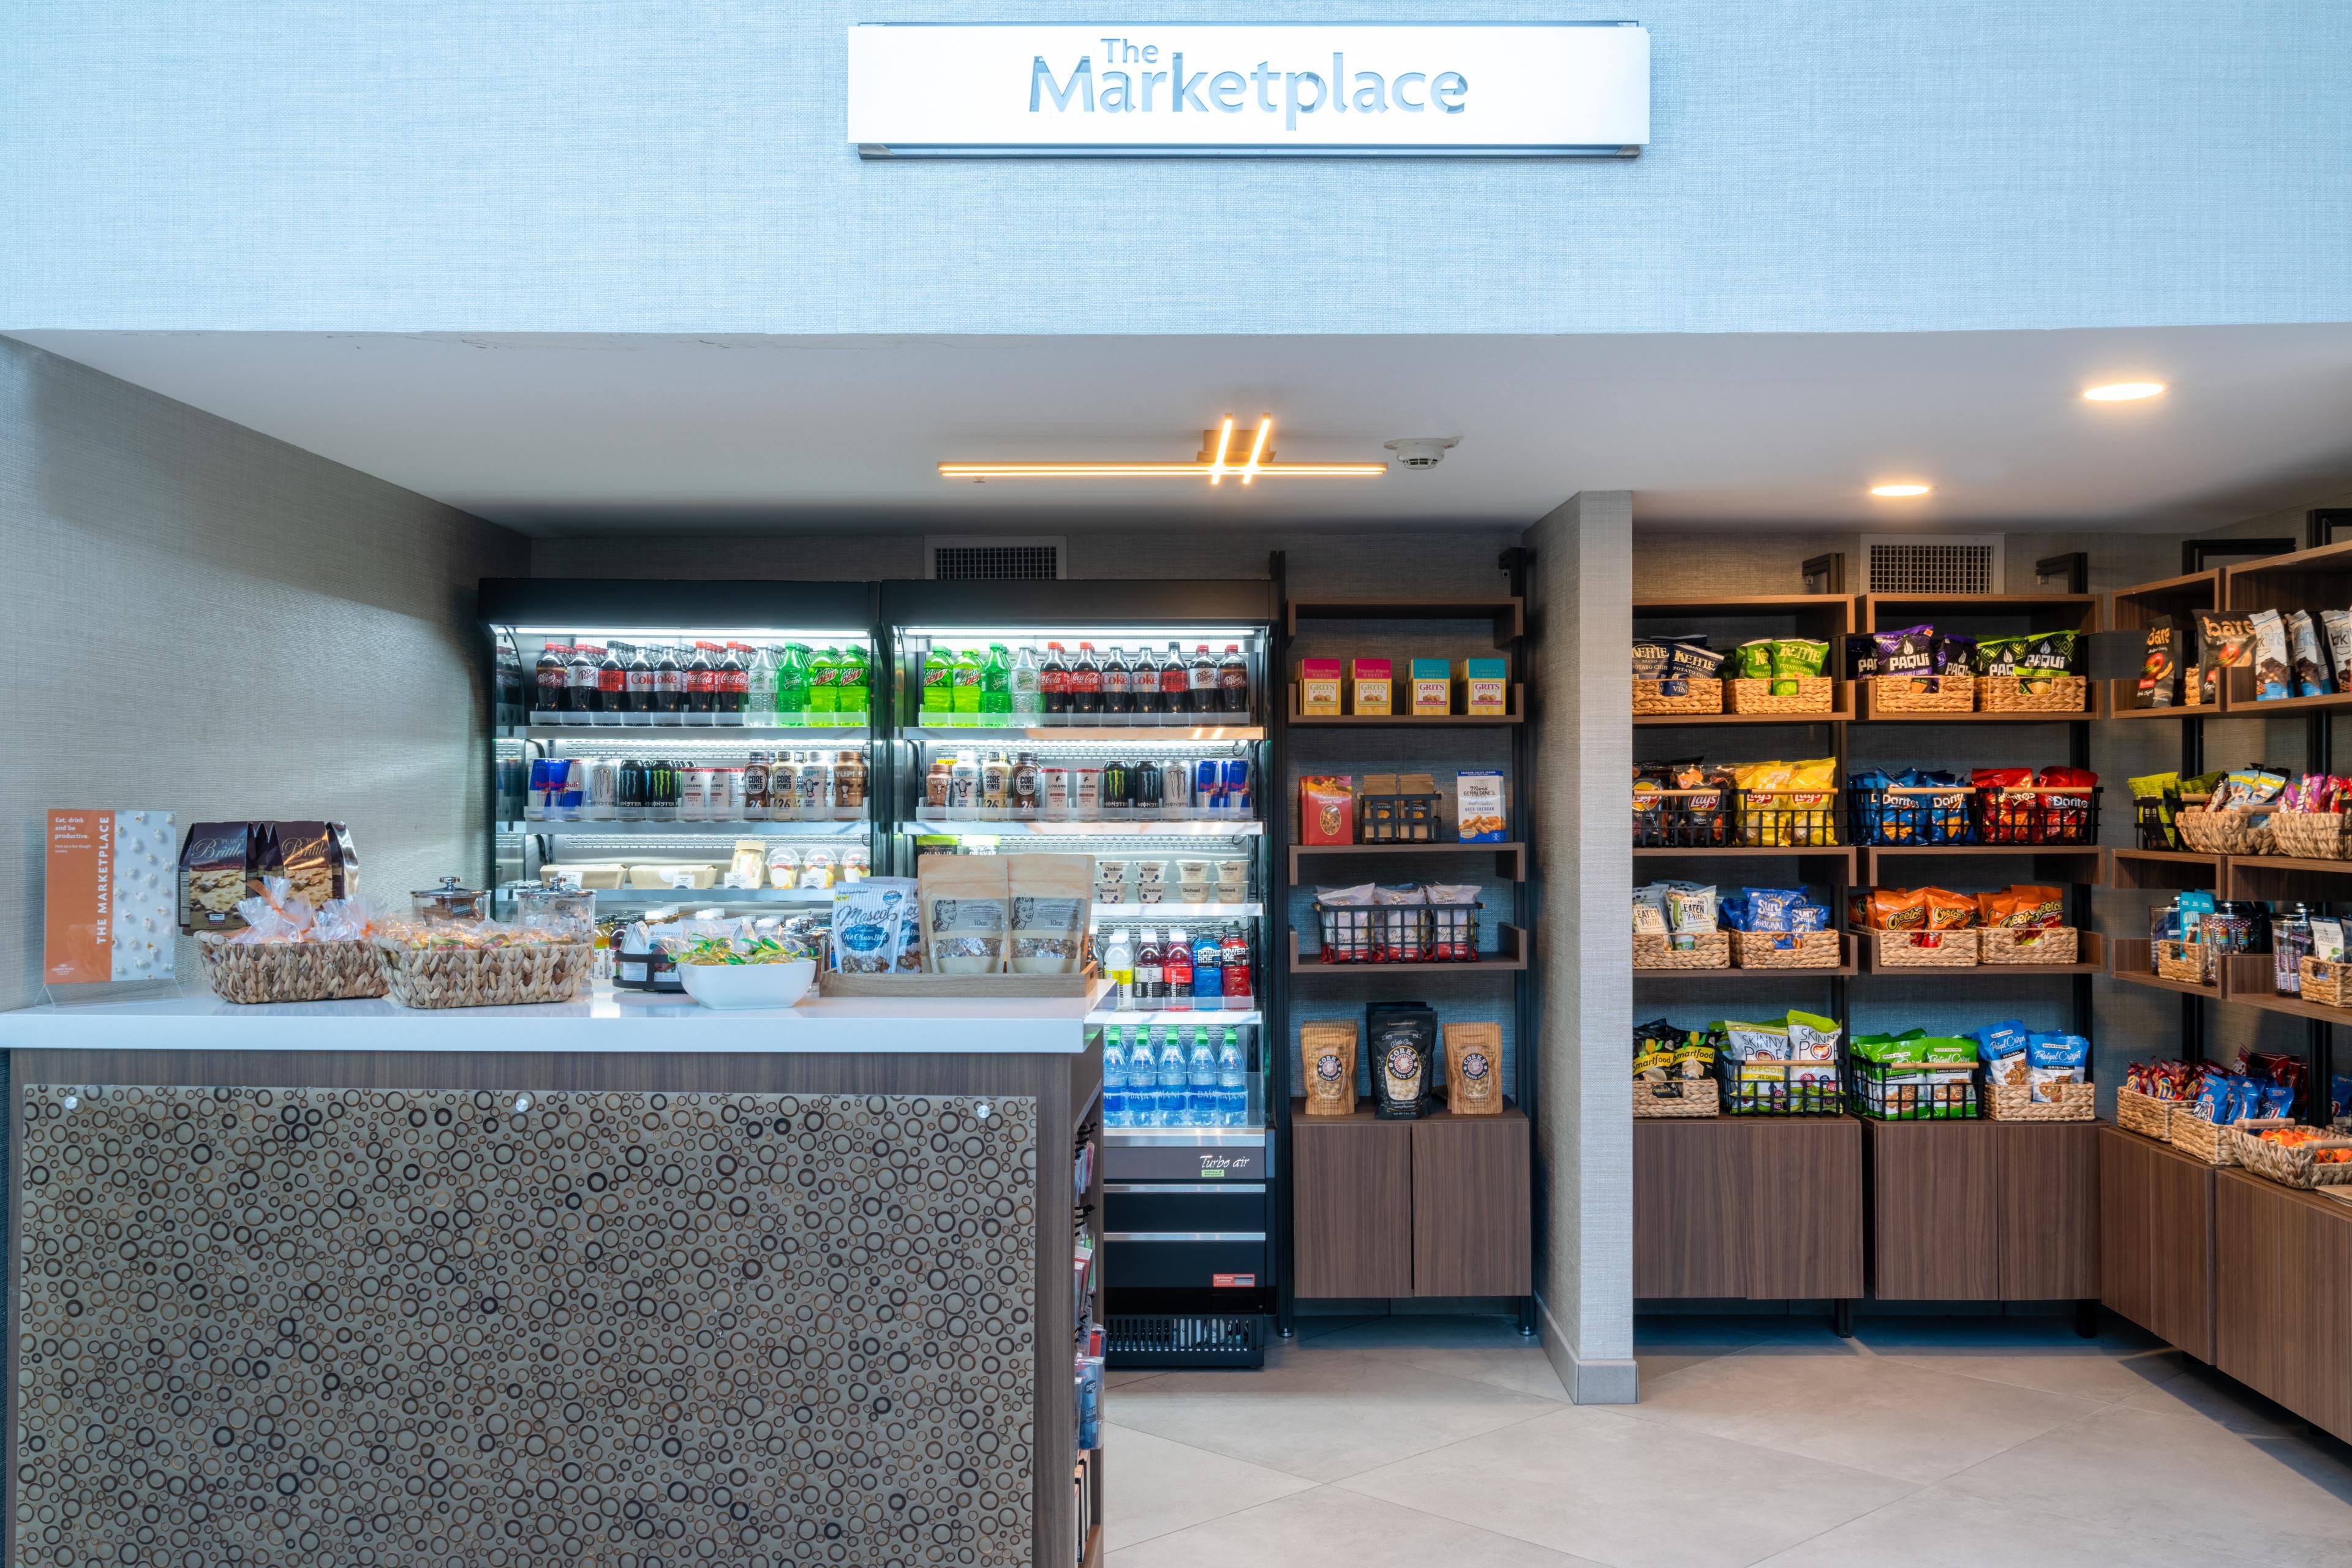 Visit our lobby Marketplace for something salty or sweet!